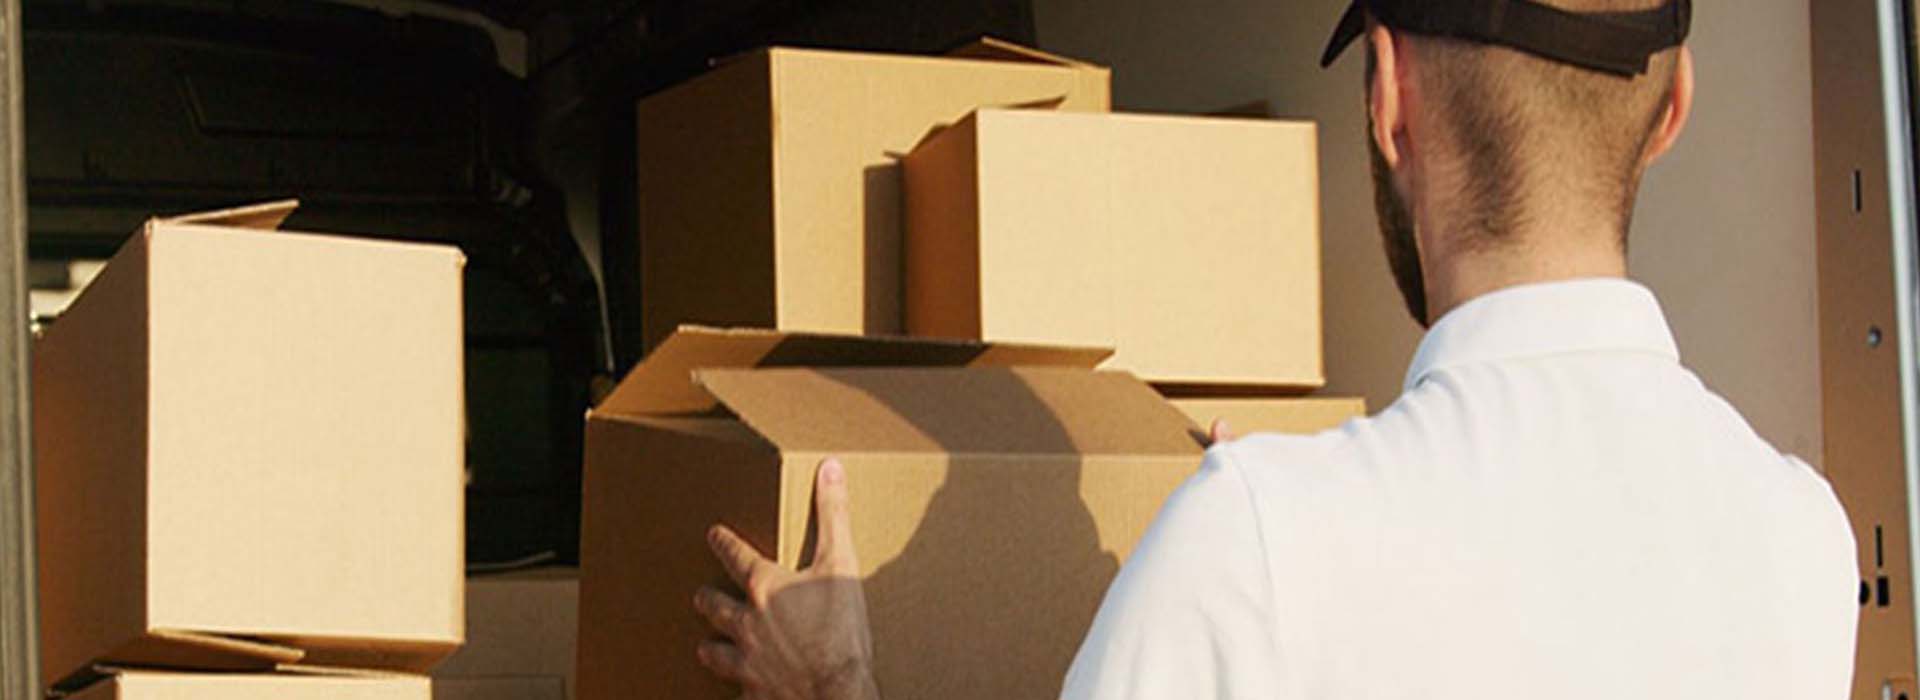   Packers and Movers